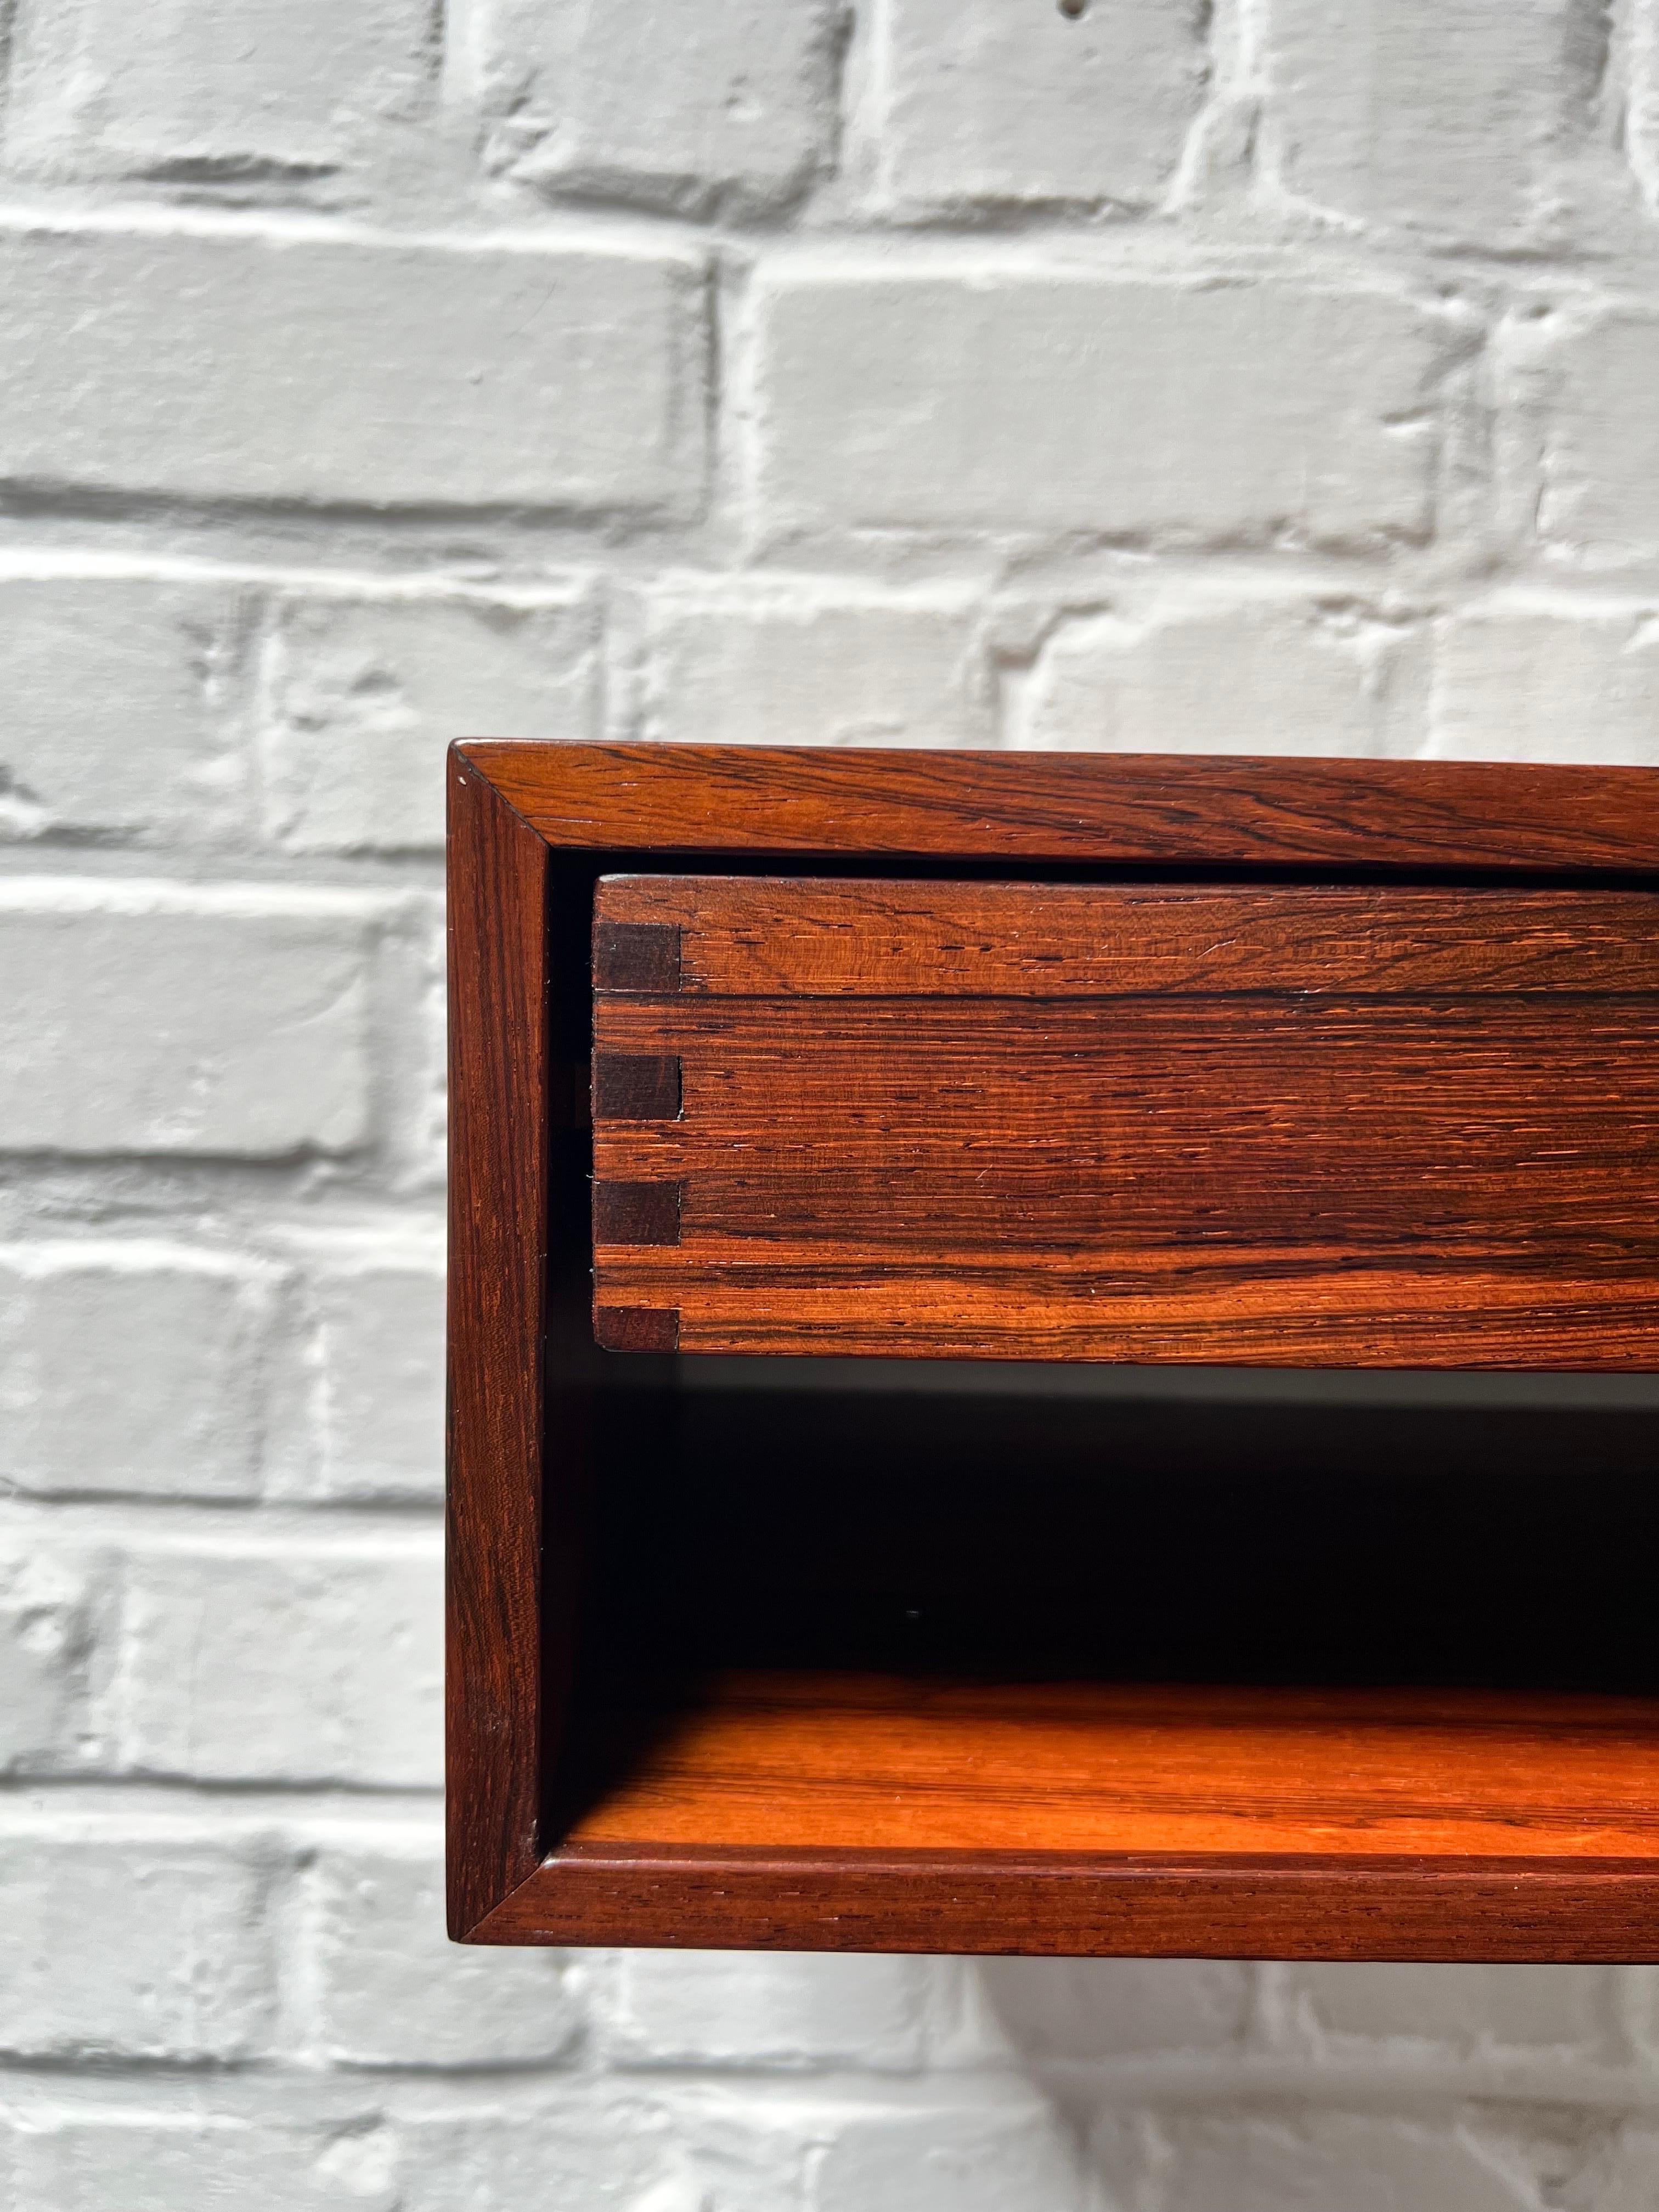 This is a elegant floating console/ nightstand. The model is extremely rare and rarely offered in rosewood. Made of the finest veneer. The drawer is made of massive rosewood and the joinery on the sides offer a nice pattern. Perfect as nightstands